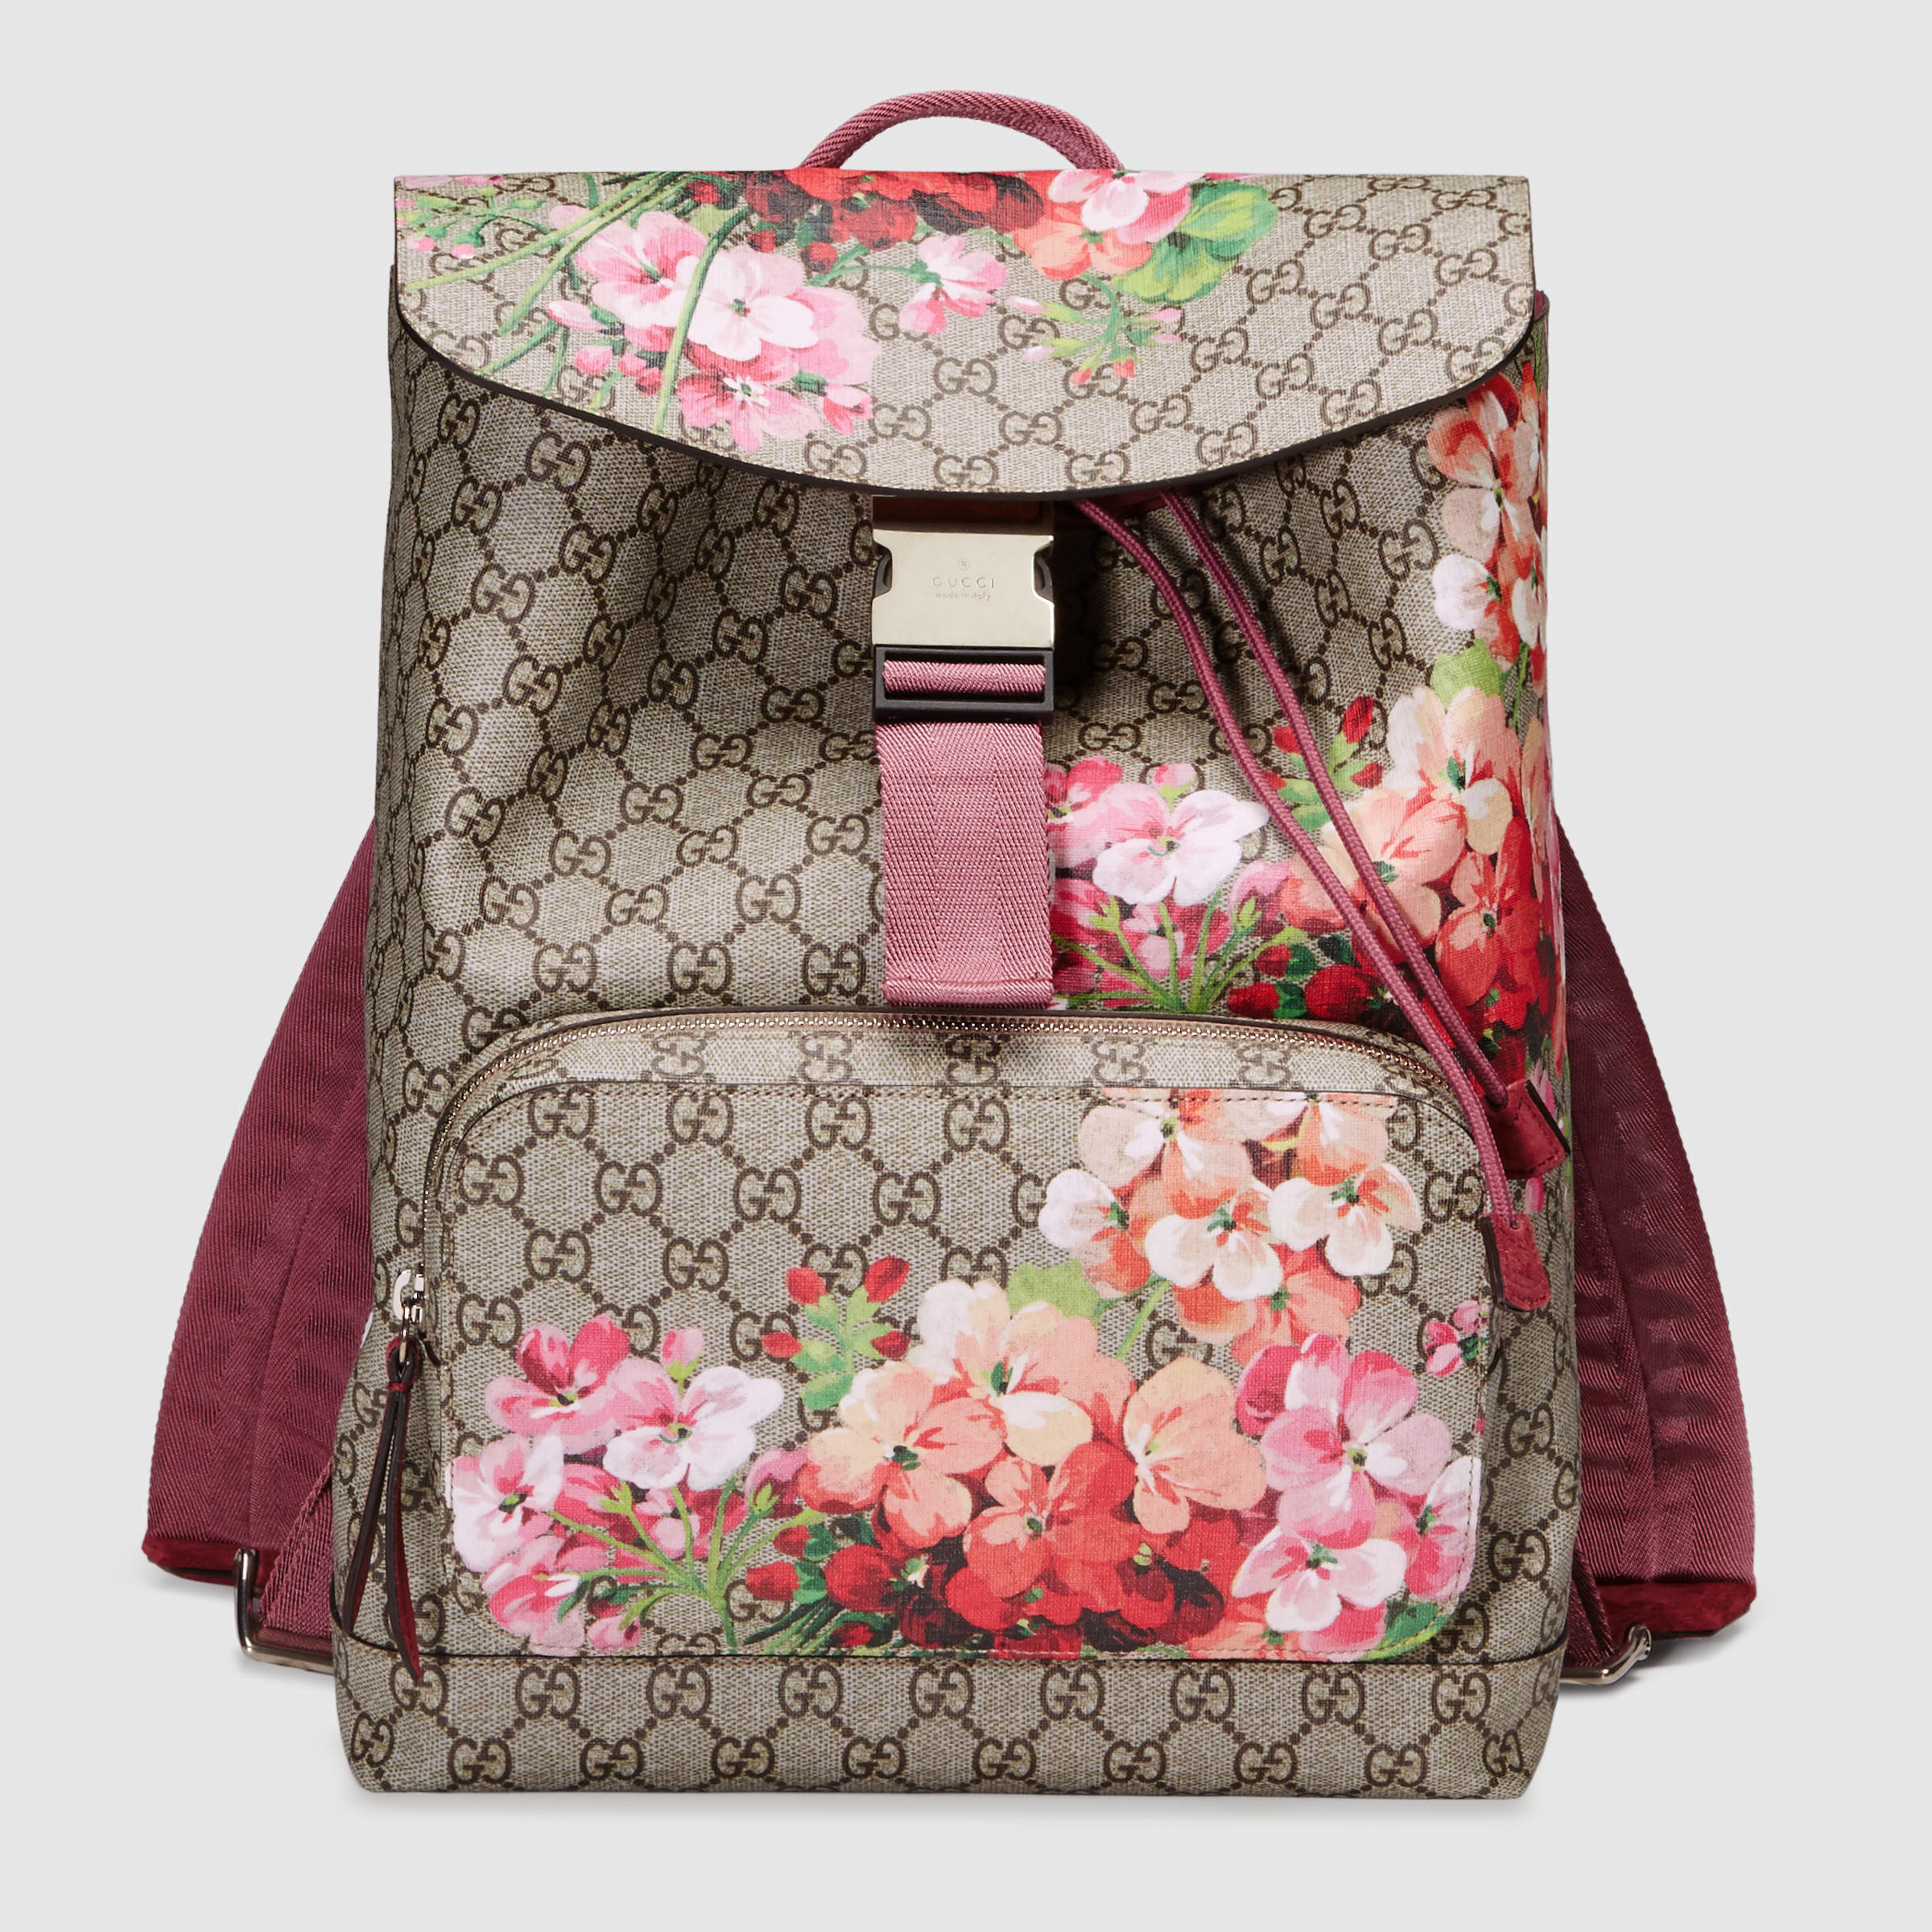 Gucci Gg Blooms Backpack in Multicolor (blooms print) | Lyst